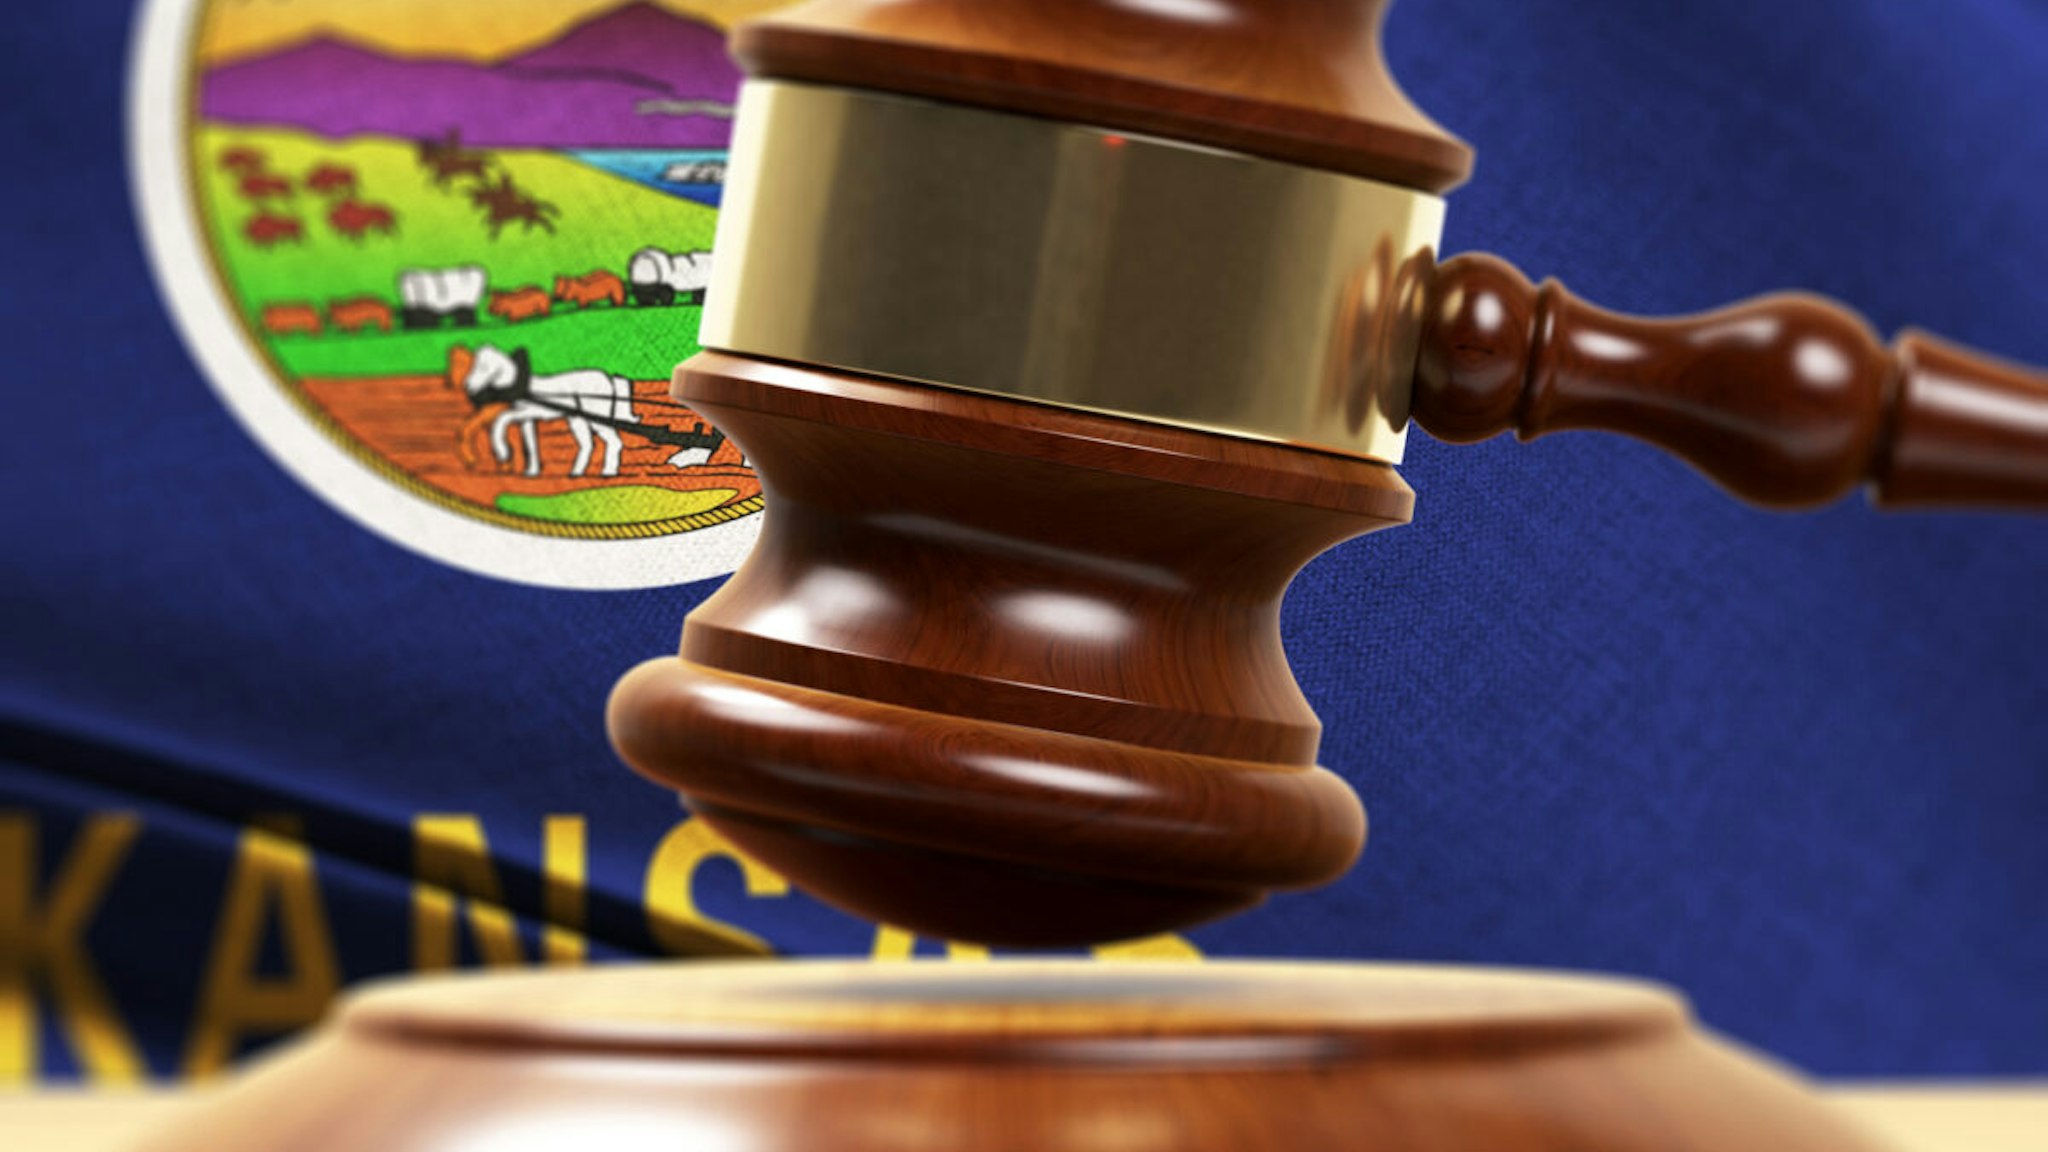 Wood Gavel Standing Front Of the Nevada Flag Closeup 3d Render Focused image